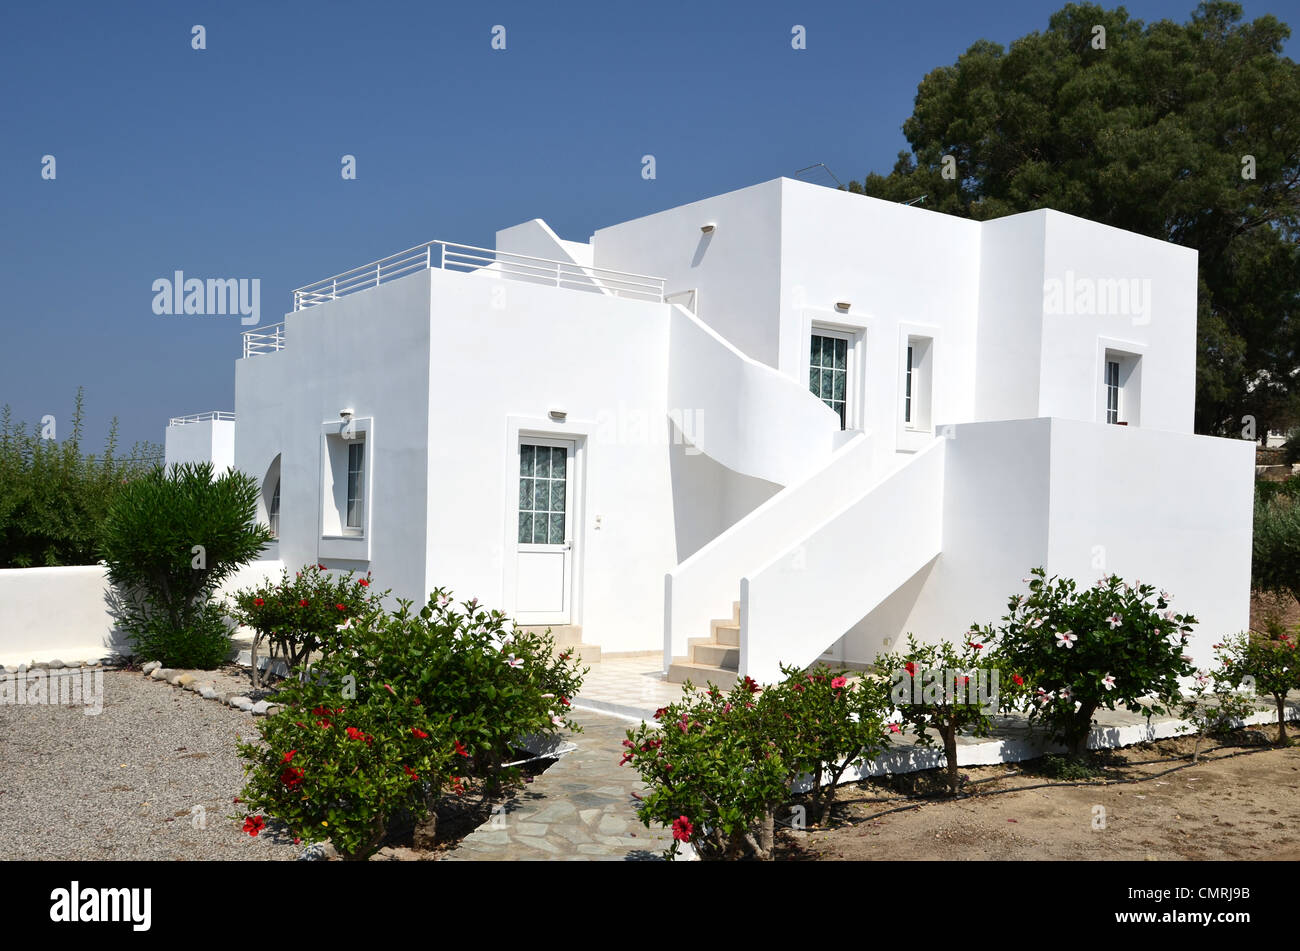 New white painted holiday vacation villa. Image taken in Greece. Stock Photo